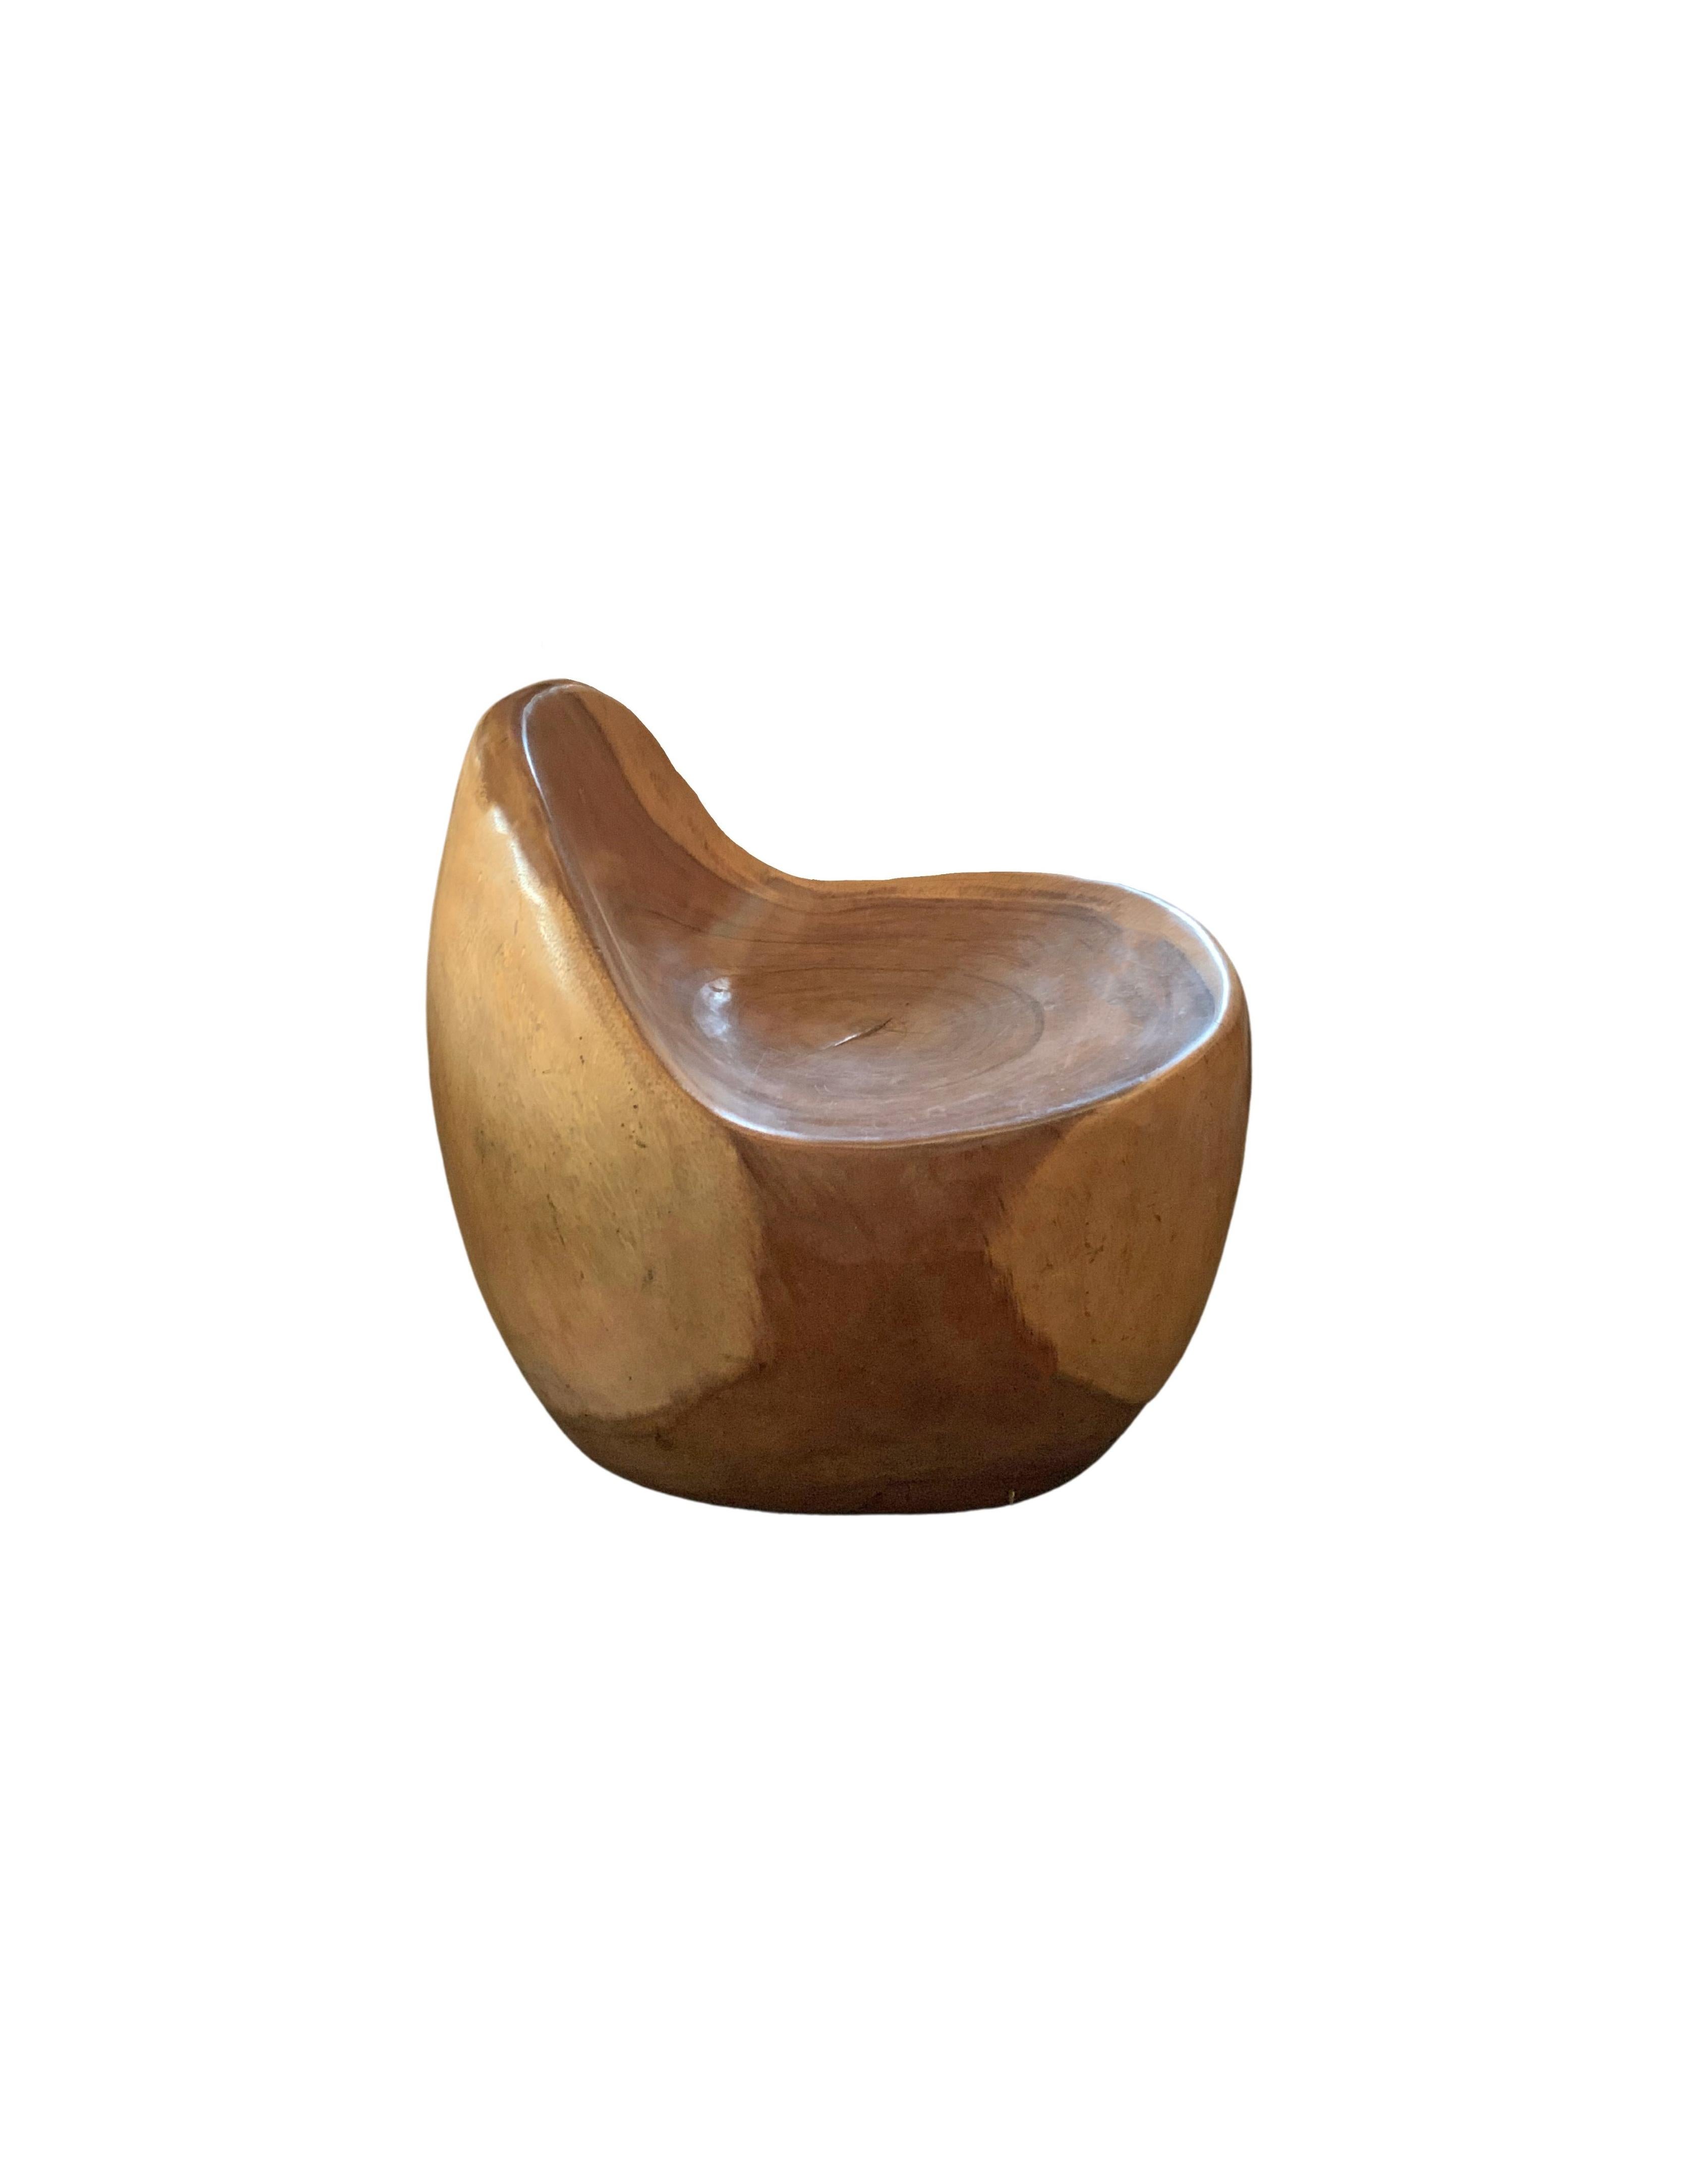 A wonderfully sculptural chair resembling an egg with a perfectly shaped seat and back rest, providing both comfort and elegance. Its neutral pigment and subtle wood texture makes it perfect for any space. A uniquely sculptural and versatile piece